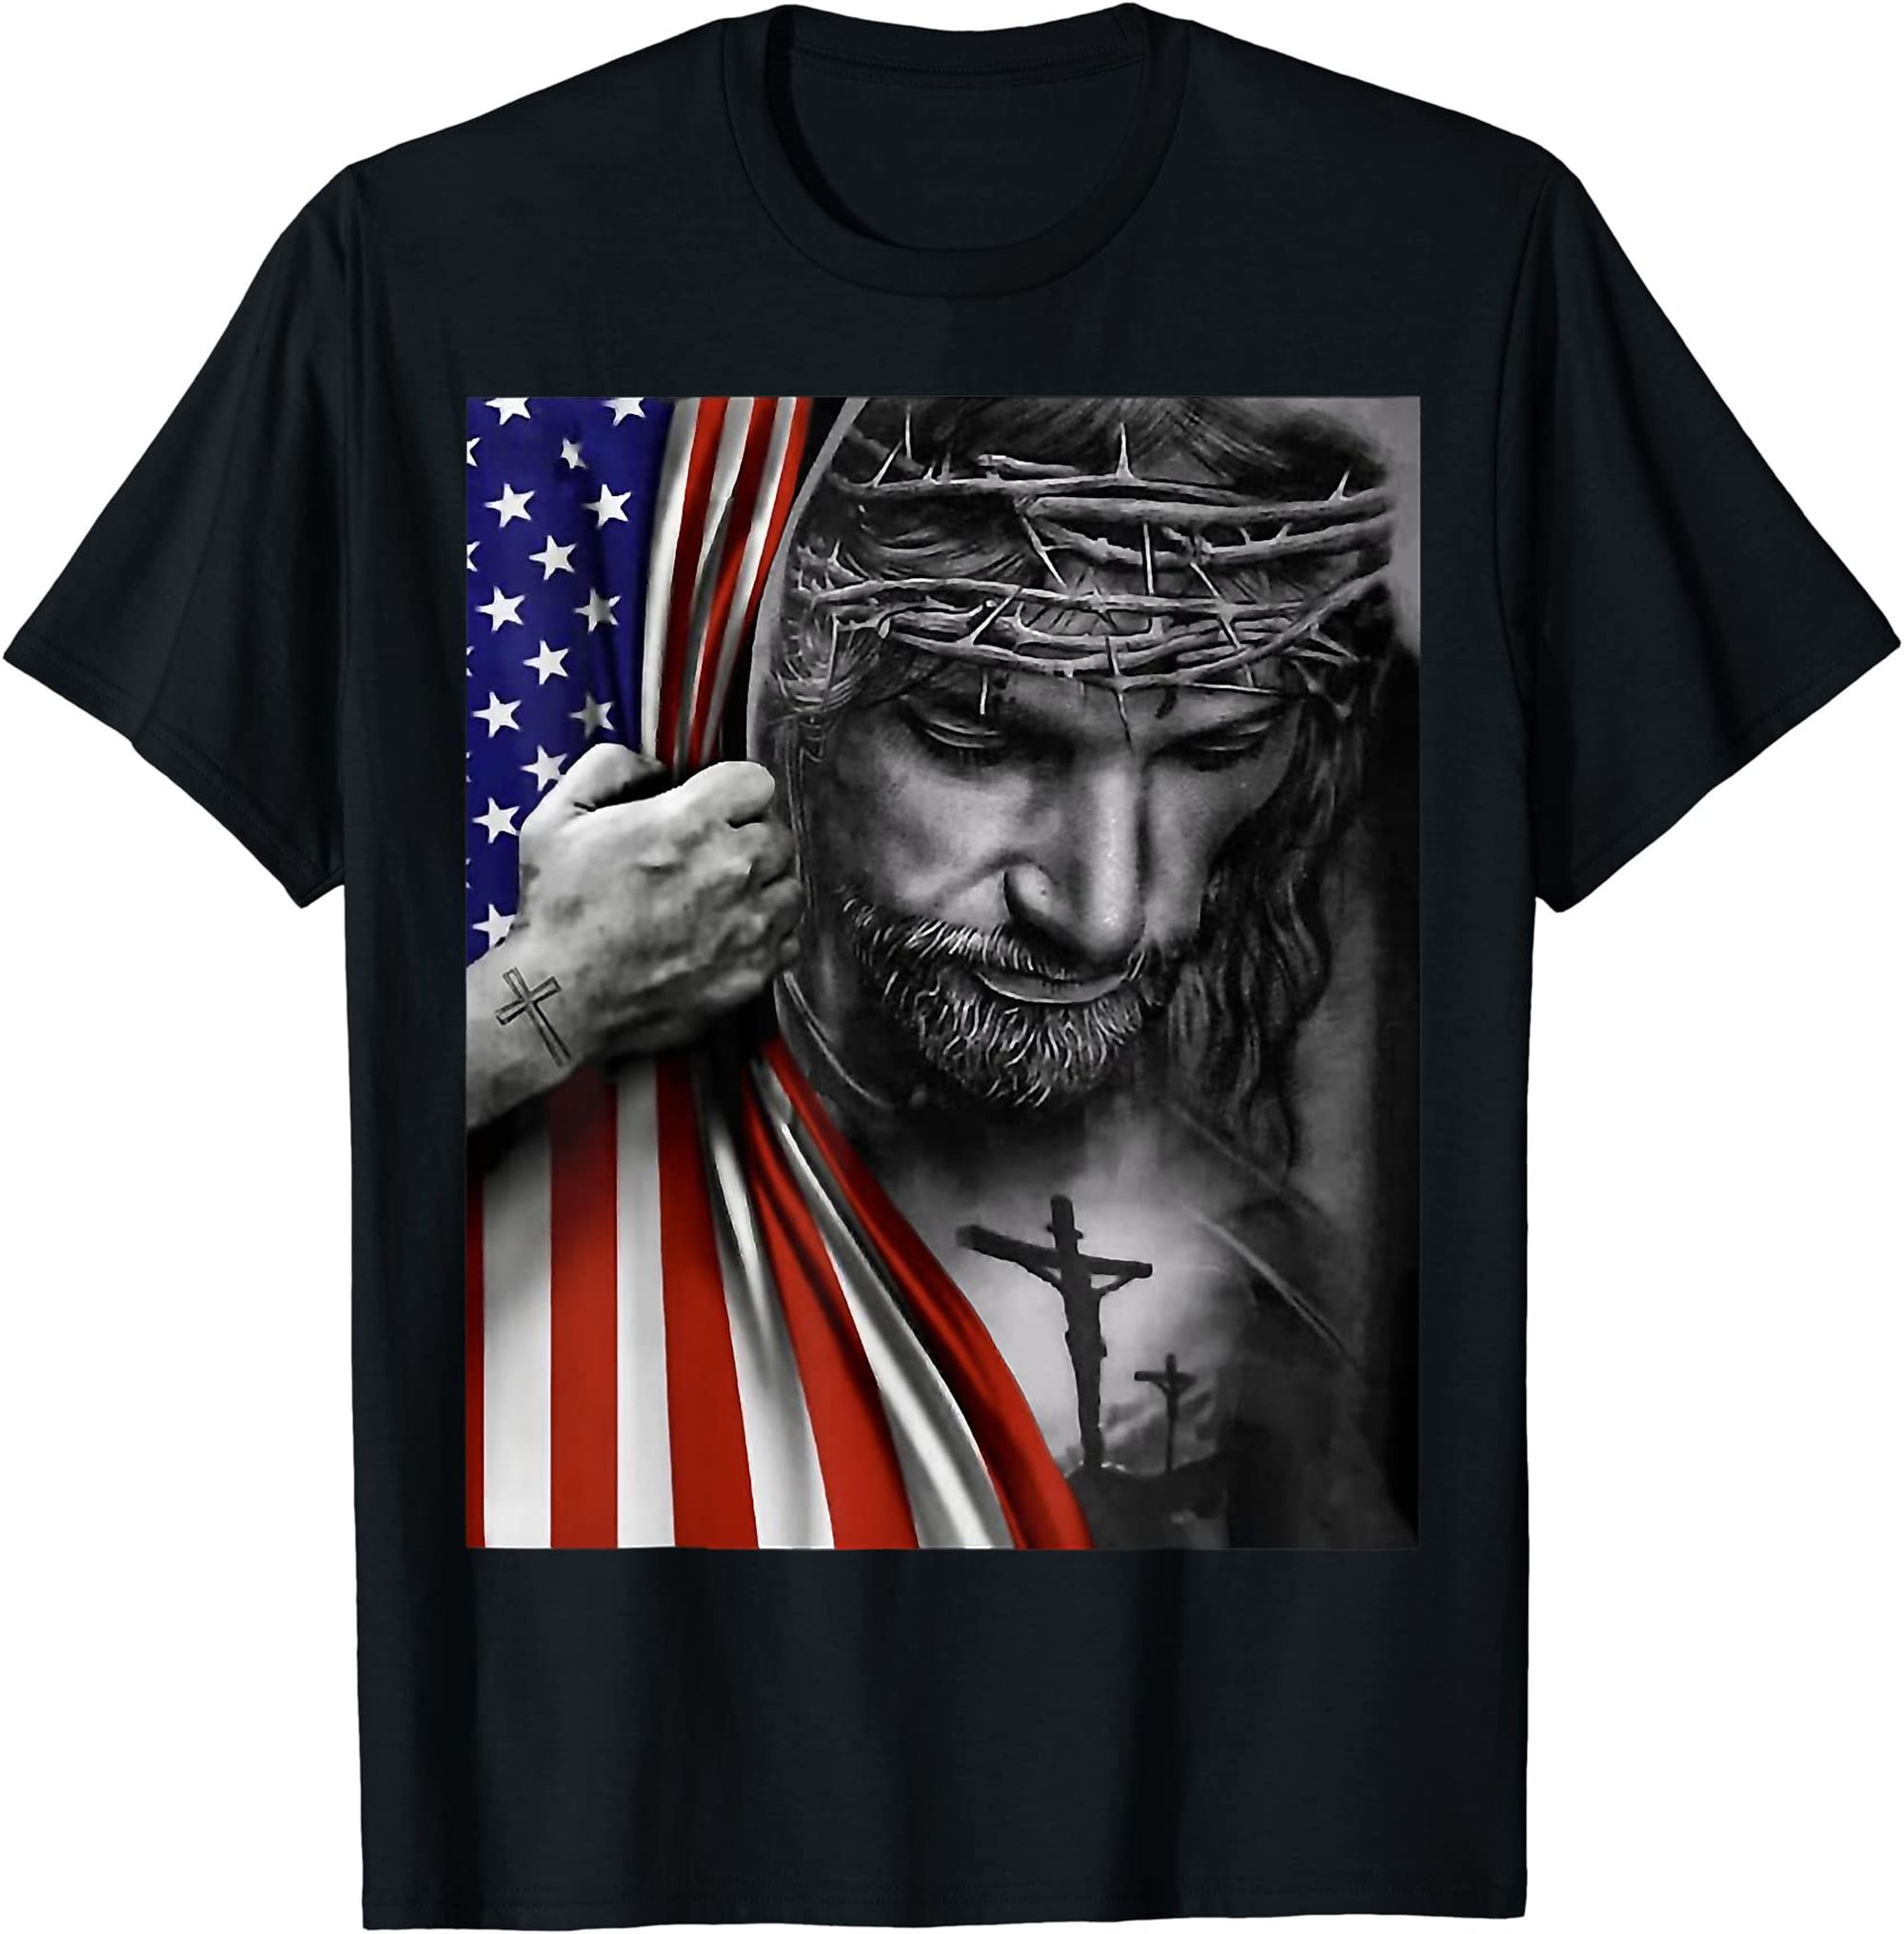 American Flag And Jesus Happy Independence Day 4th Of July T-shirt Full Size Up To 5xl